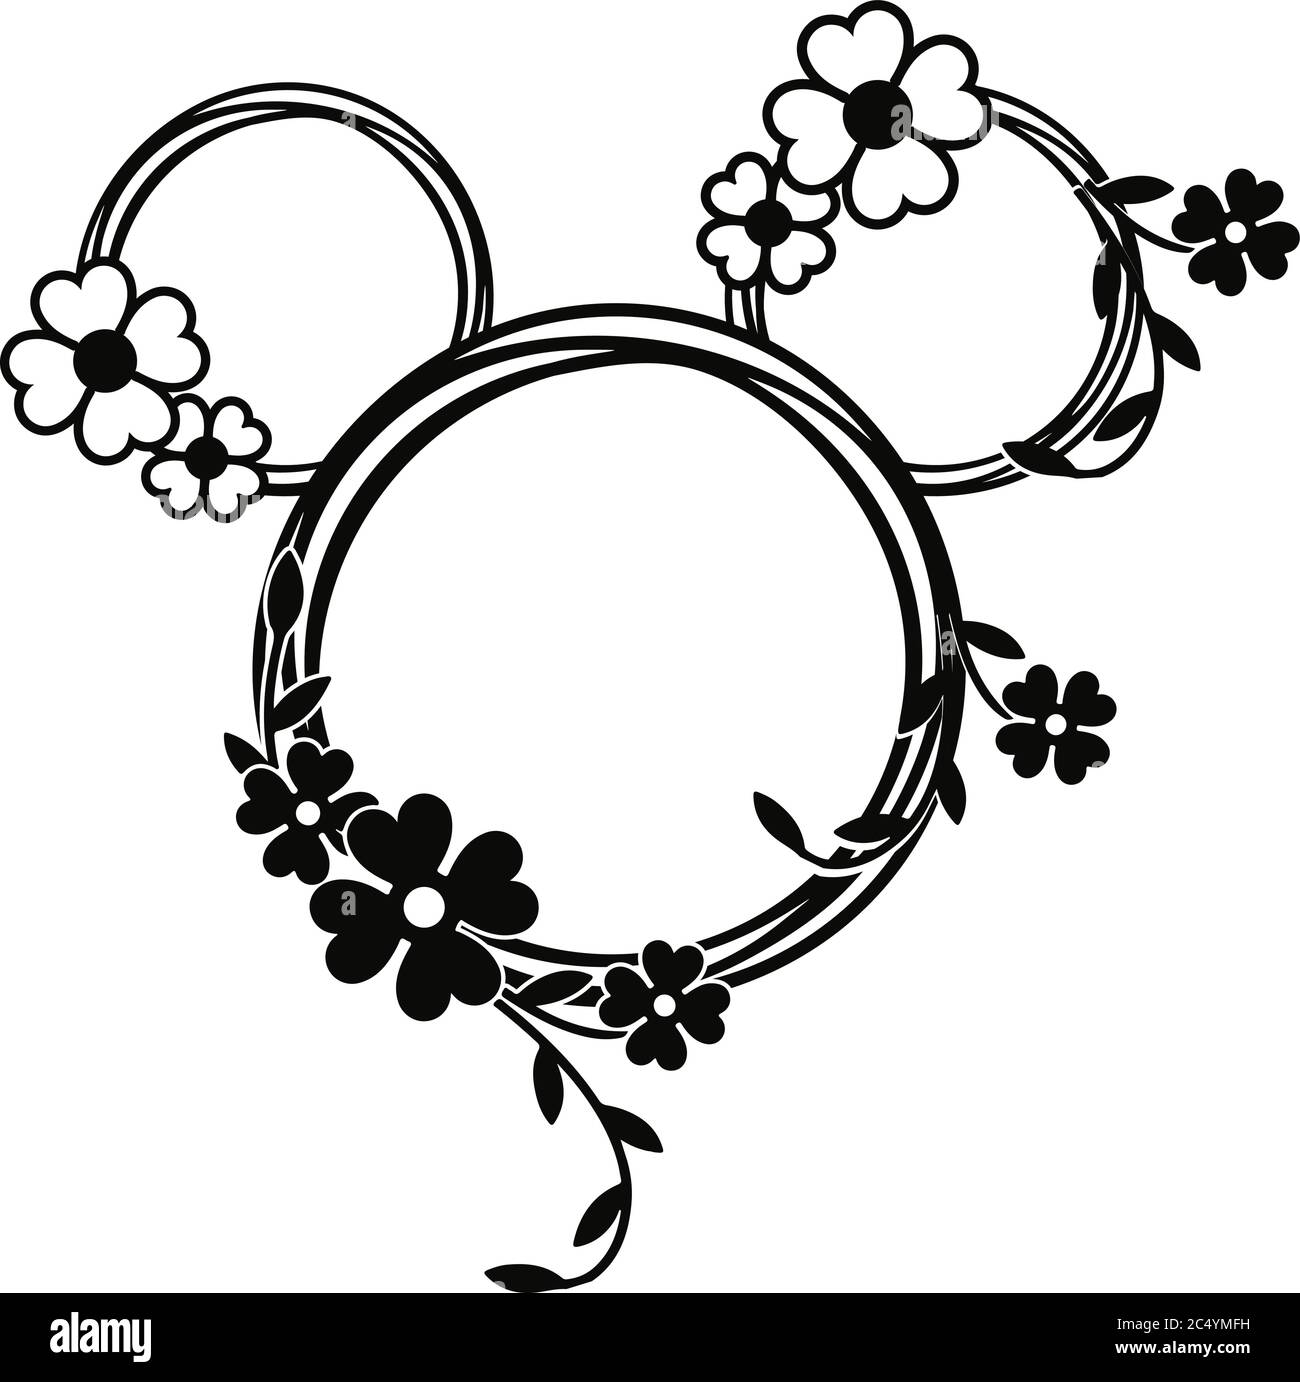 Mickey Mouse / minnie mouse head VECTOR Stock Vector